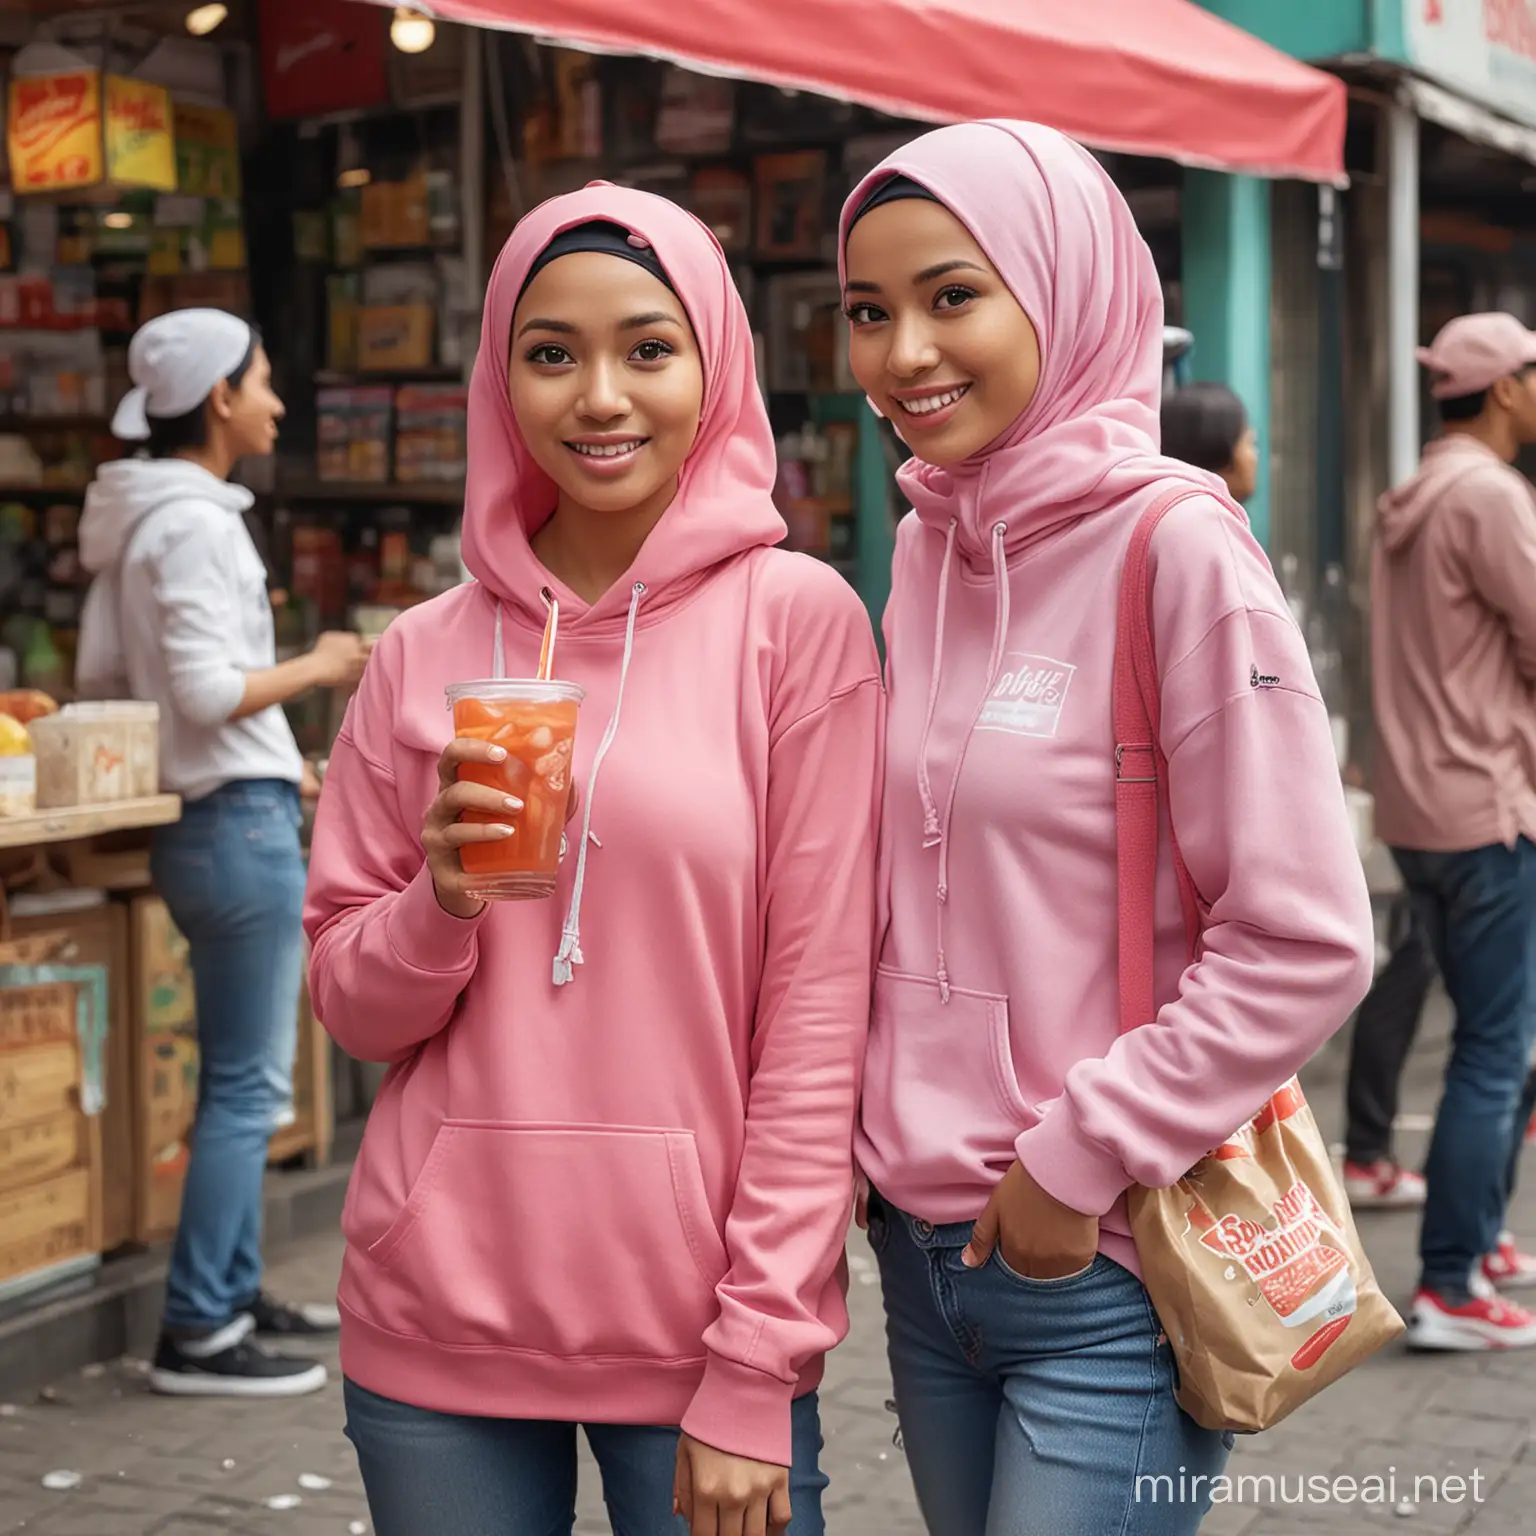 Indonesian Woman in Hijab Gossiping at Food Stall with Iced Tea